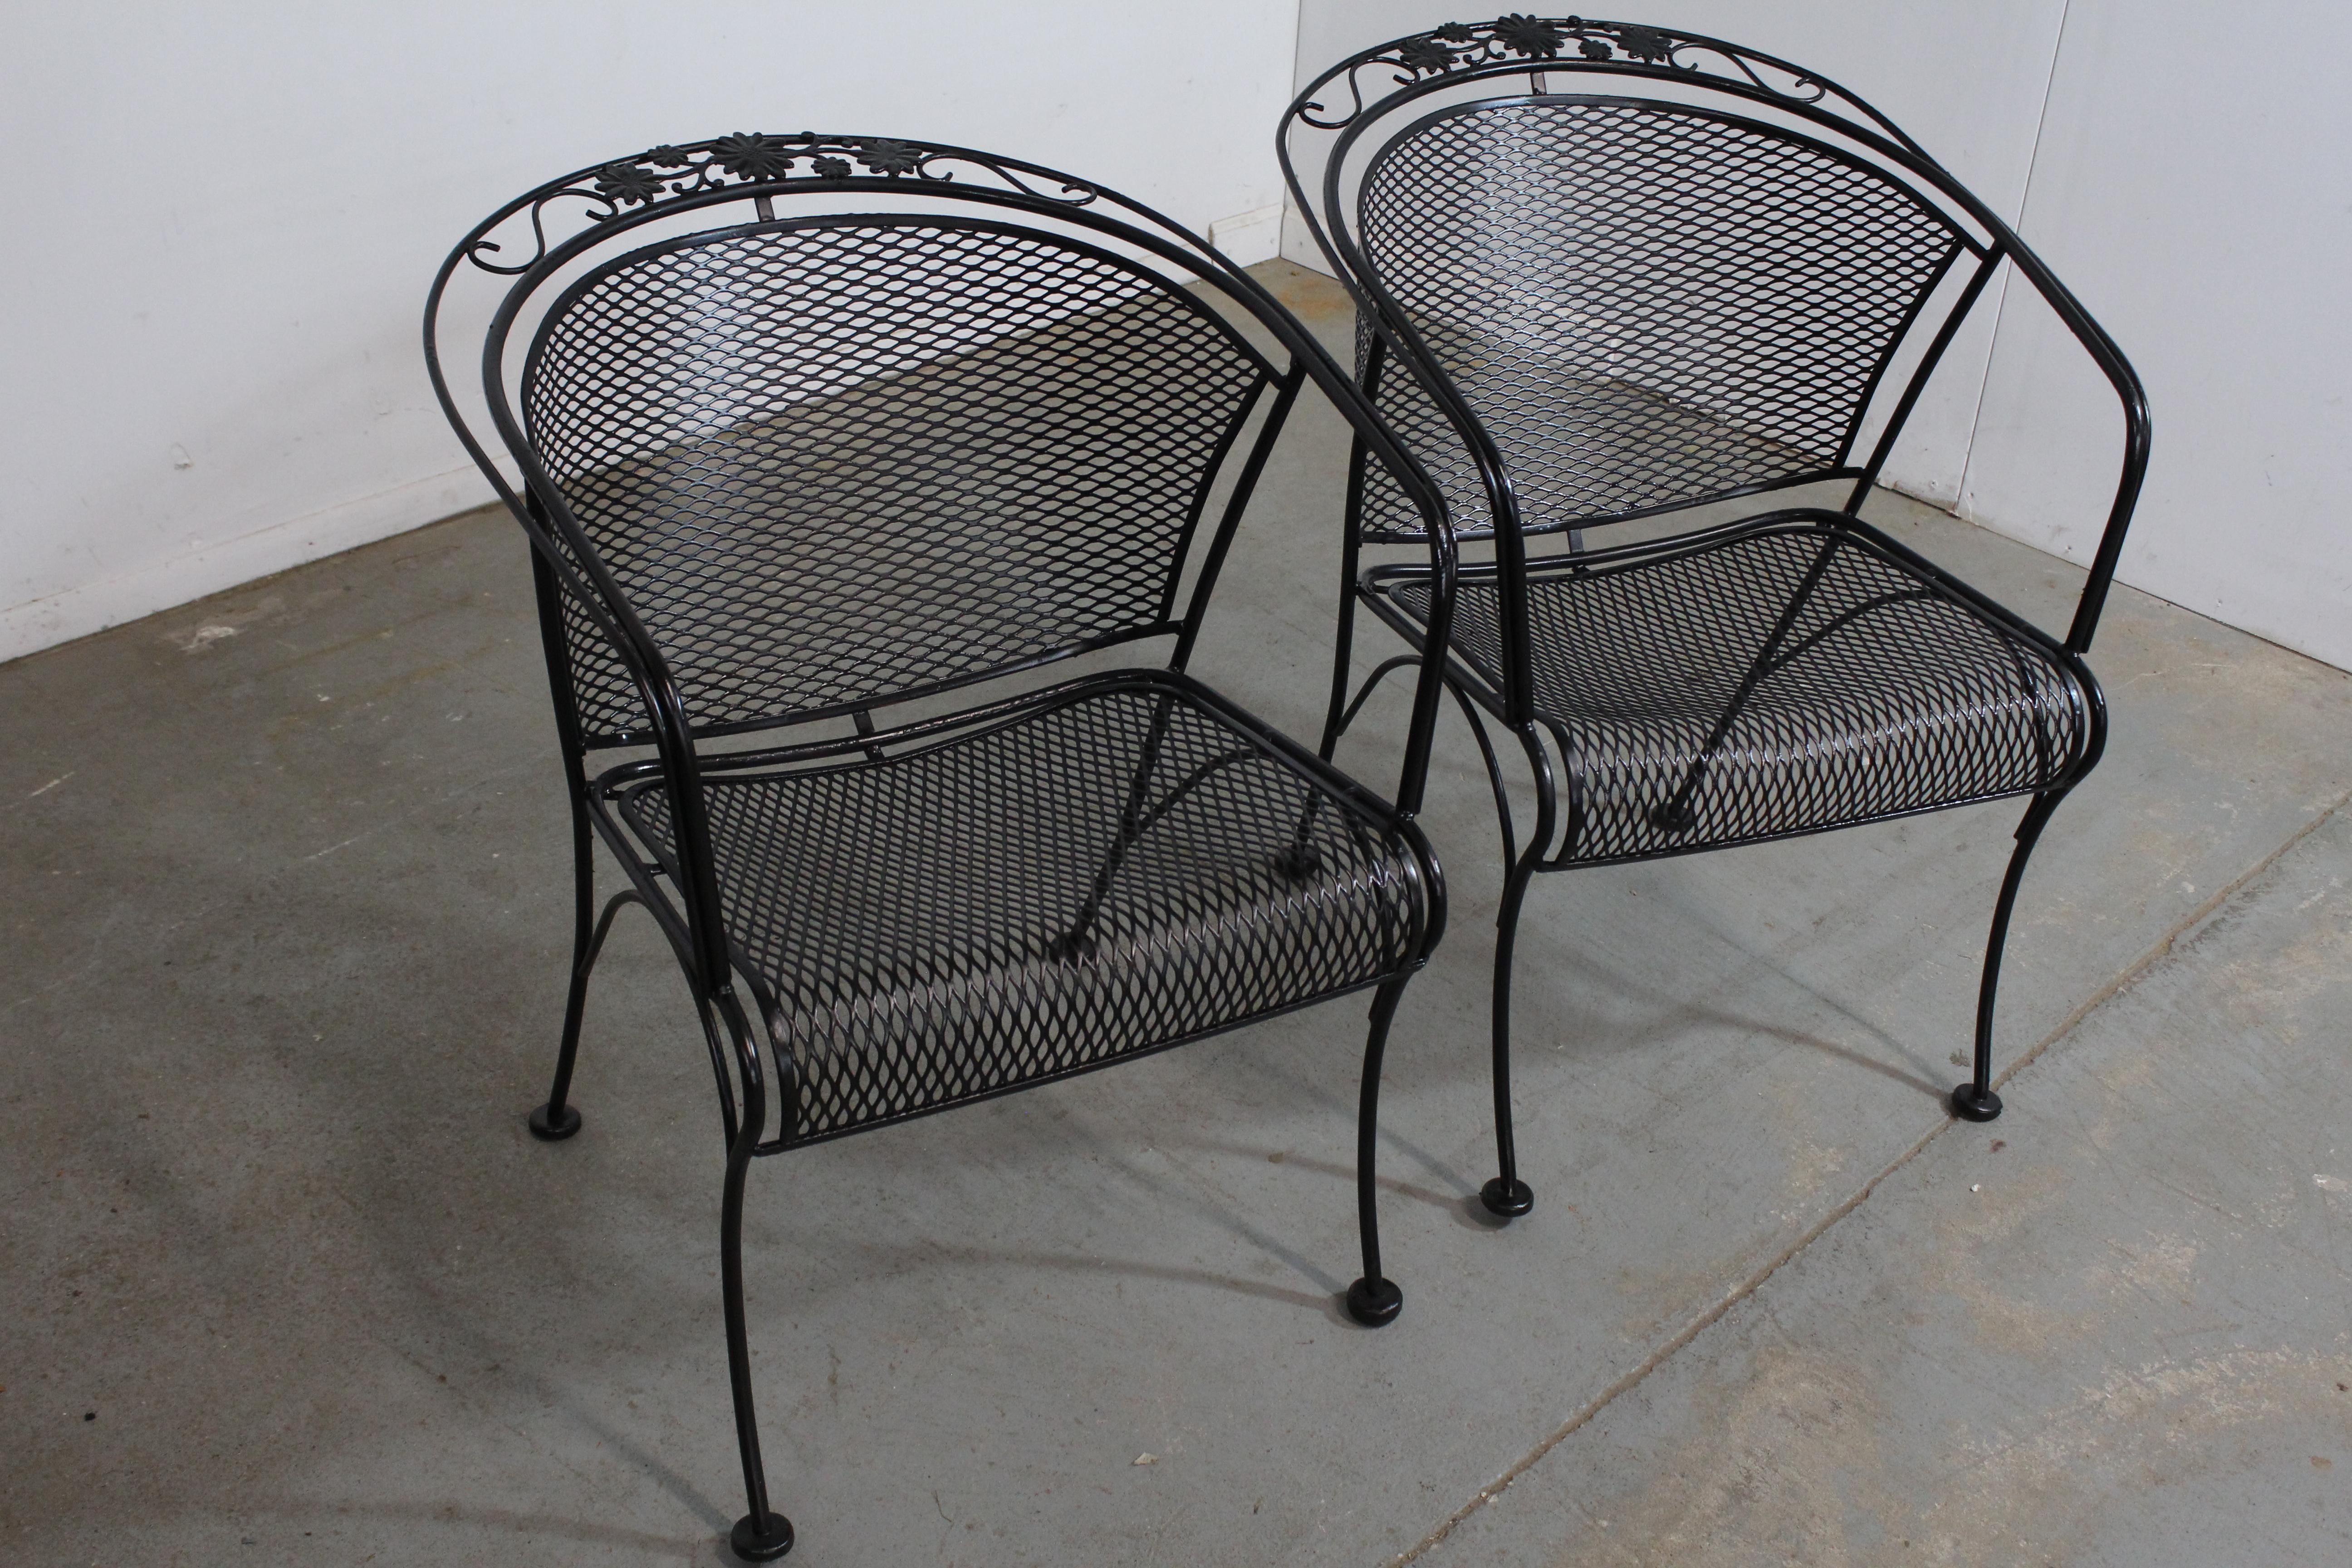 Set of 2 Mid-Century Modern Salterini curve back outdoor arm chairs.
Offered is a set of 2 Mid-Century Modern outdoor arm chairs in the style of Salterini(circa 1960's). Features Black paint and woven wrought iron with a floral pattern at the head